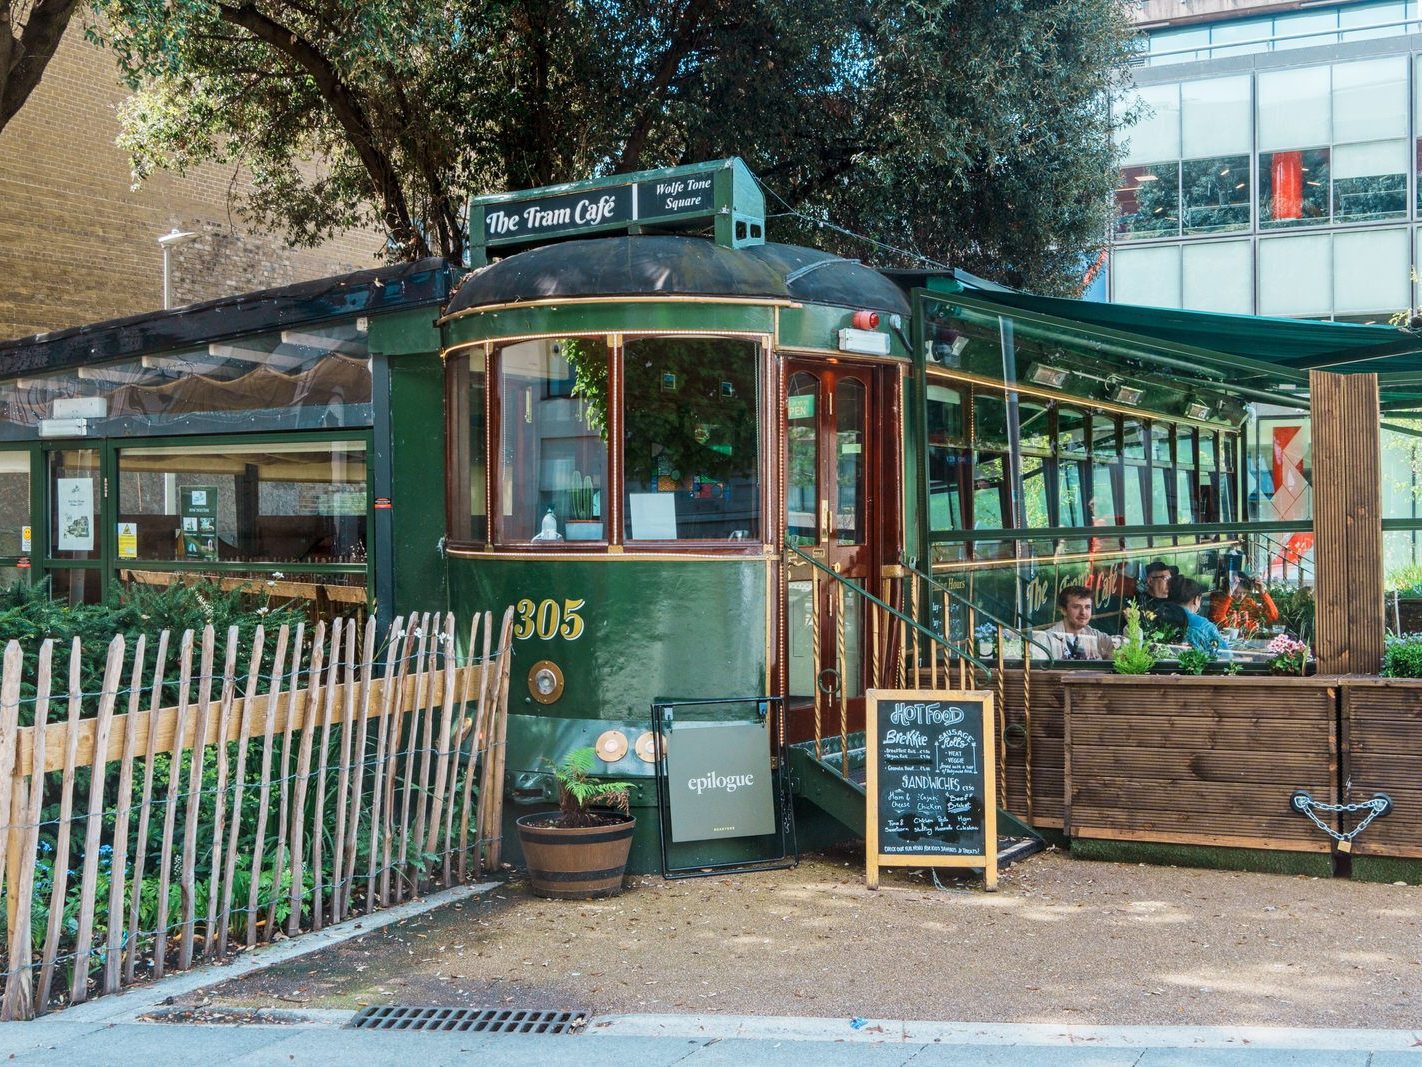 FEATURING TRAM 305 WHICH IS NOW A POPULAR CAFE 004